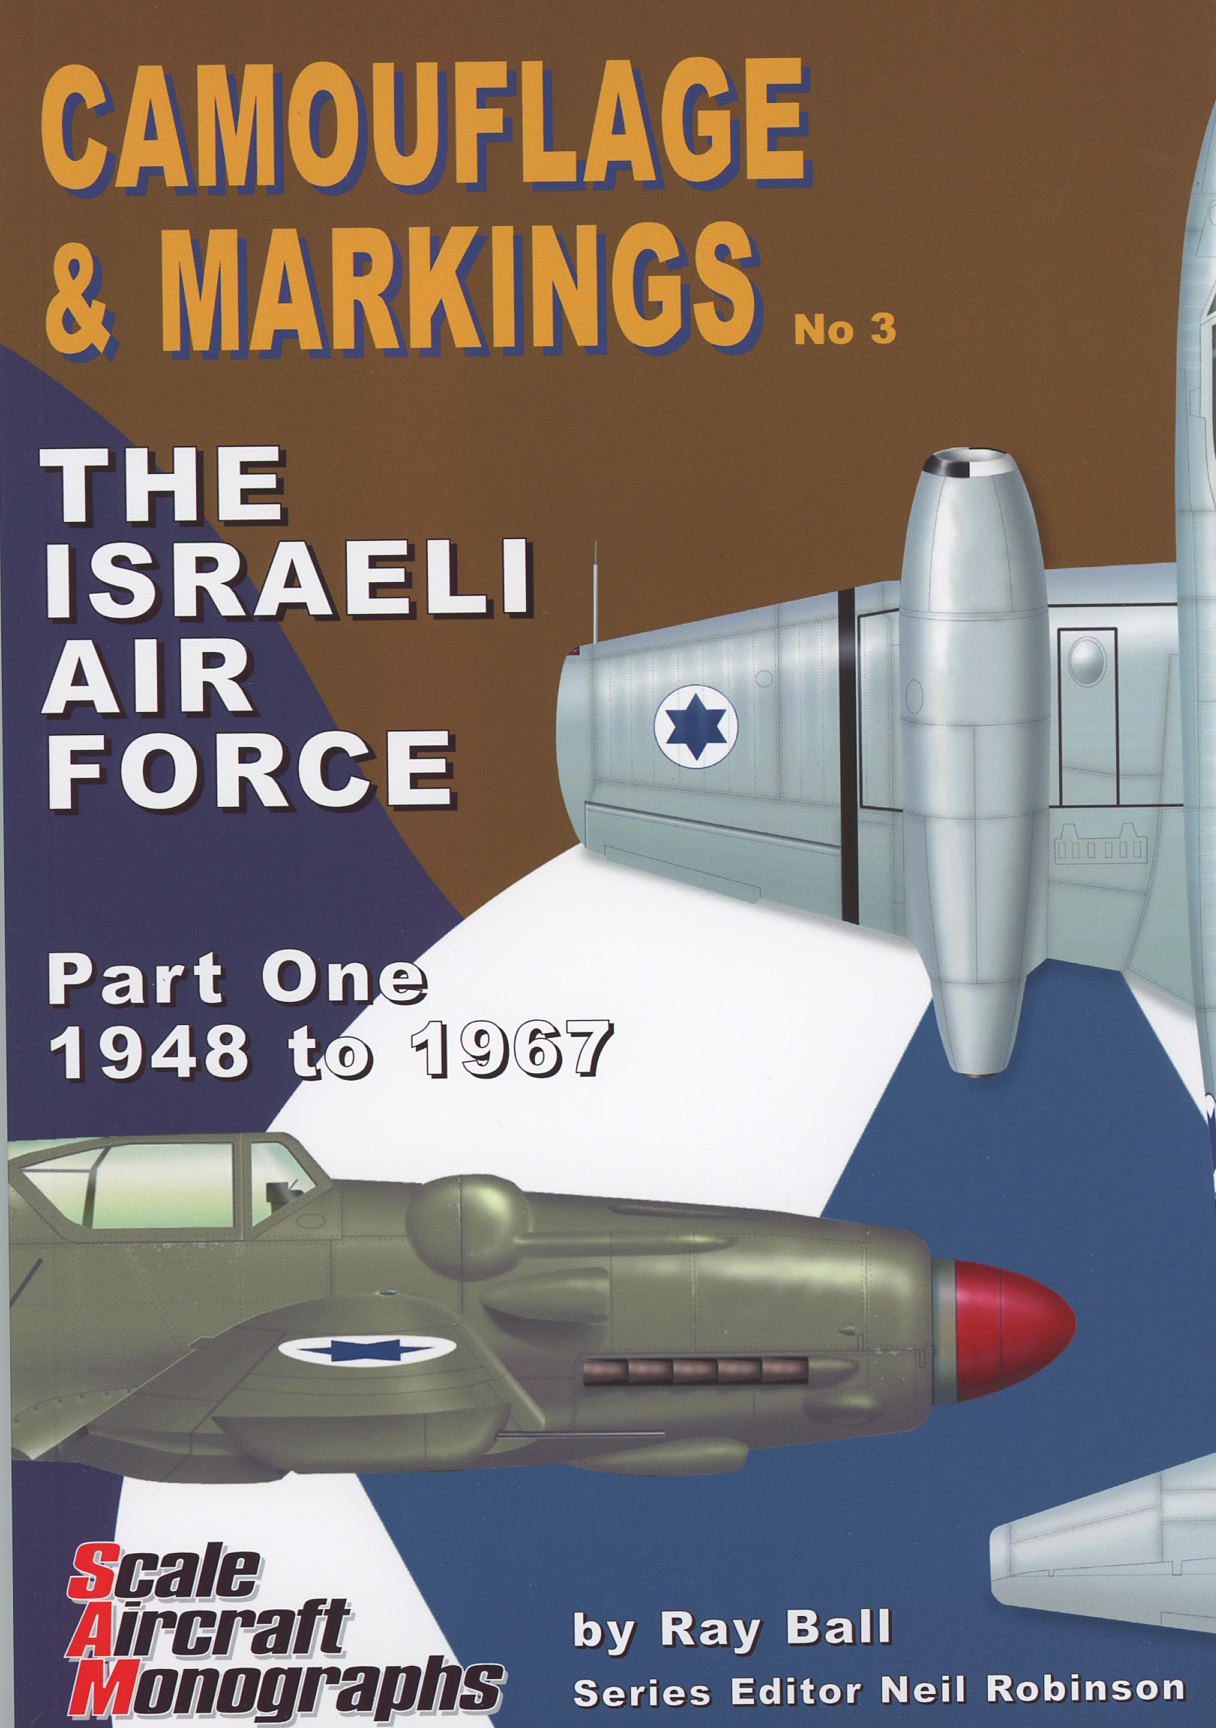 Guideline Publications Ltd Camouflage & Markings 3: The Israeli Air Force Part one 1948-1967 